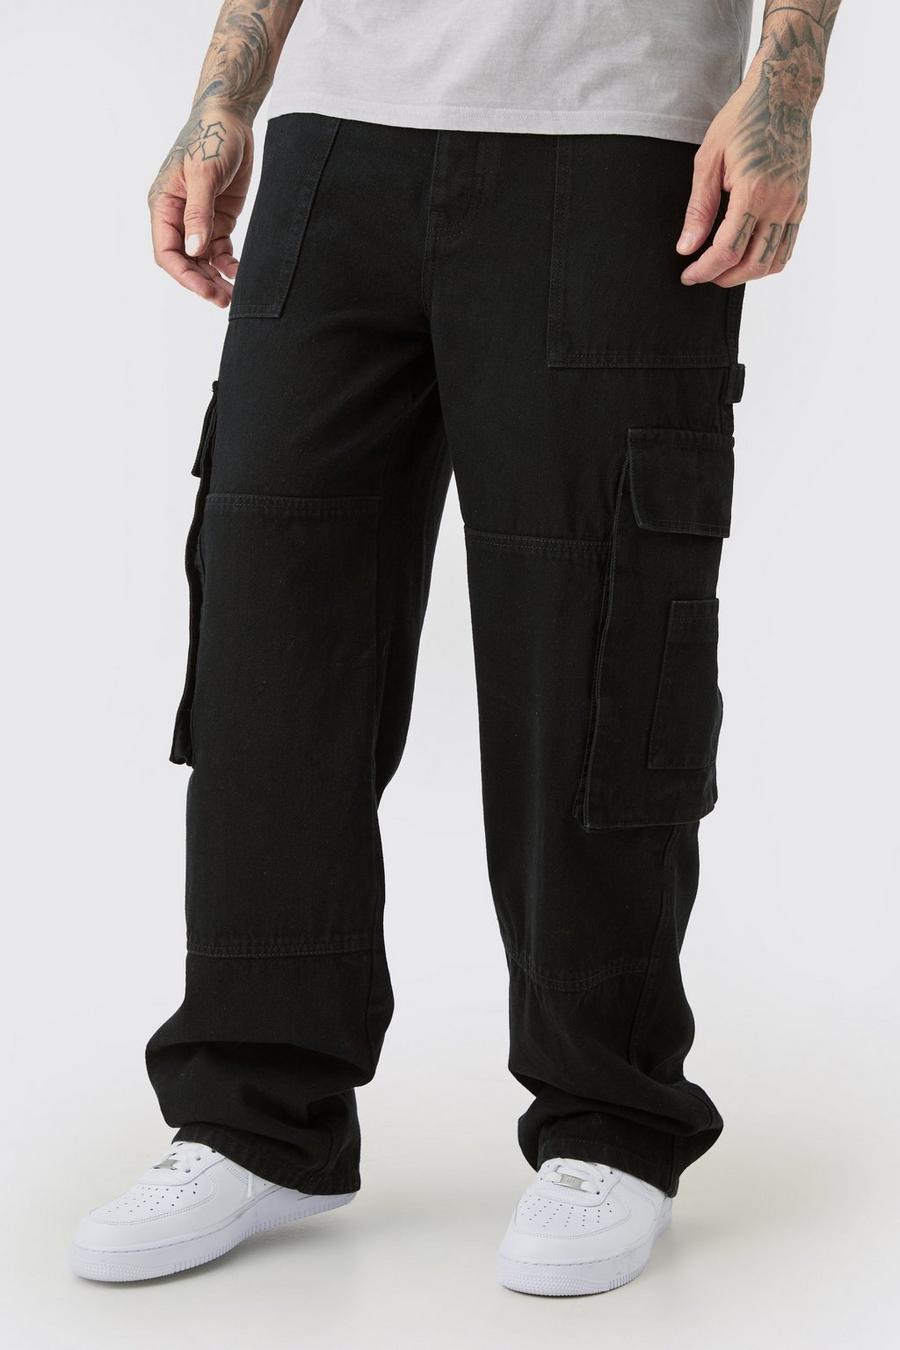 Black Tall Baggy Fit Cargo Jeans